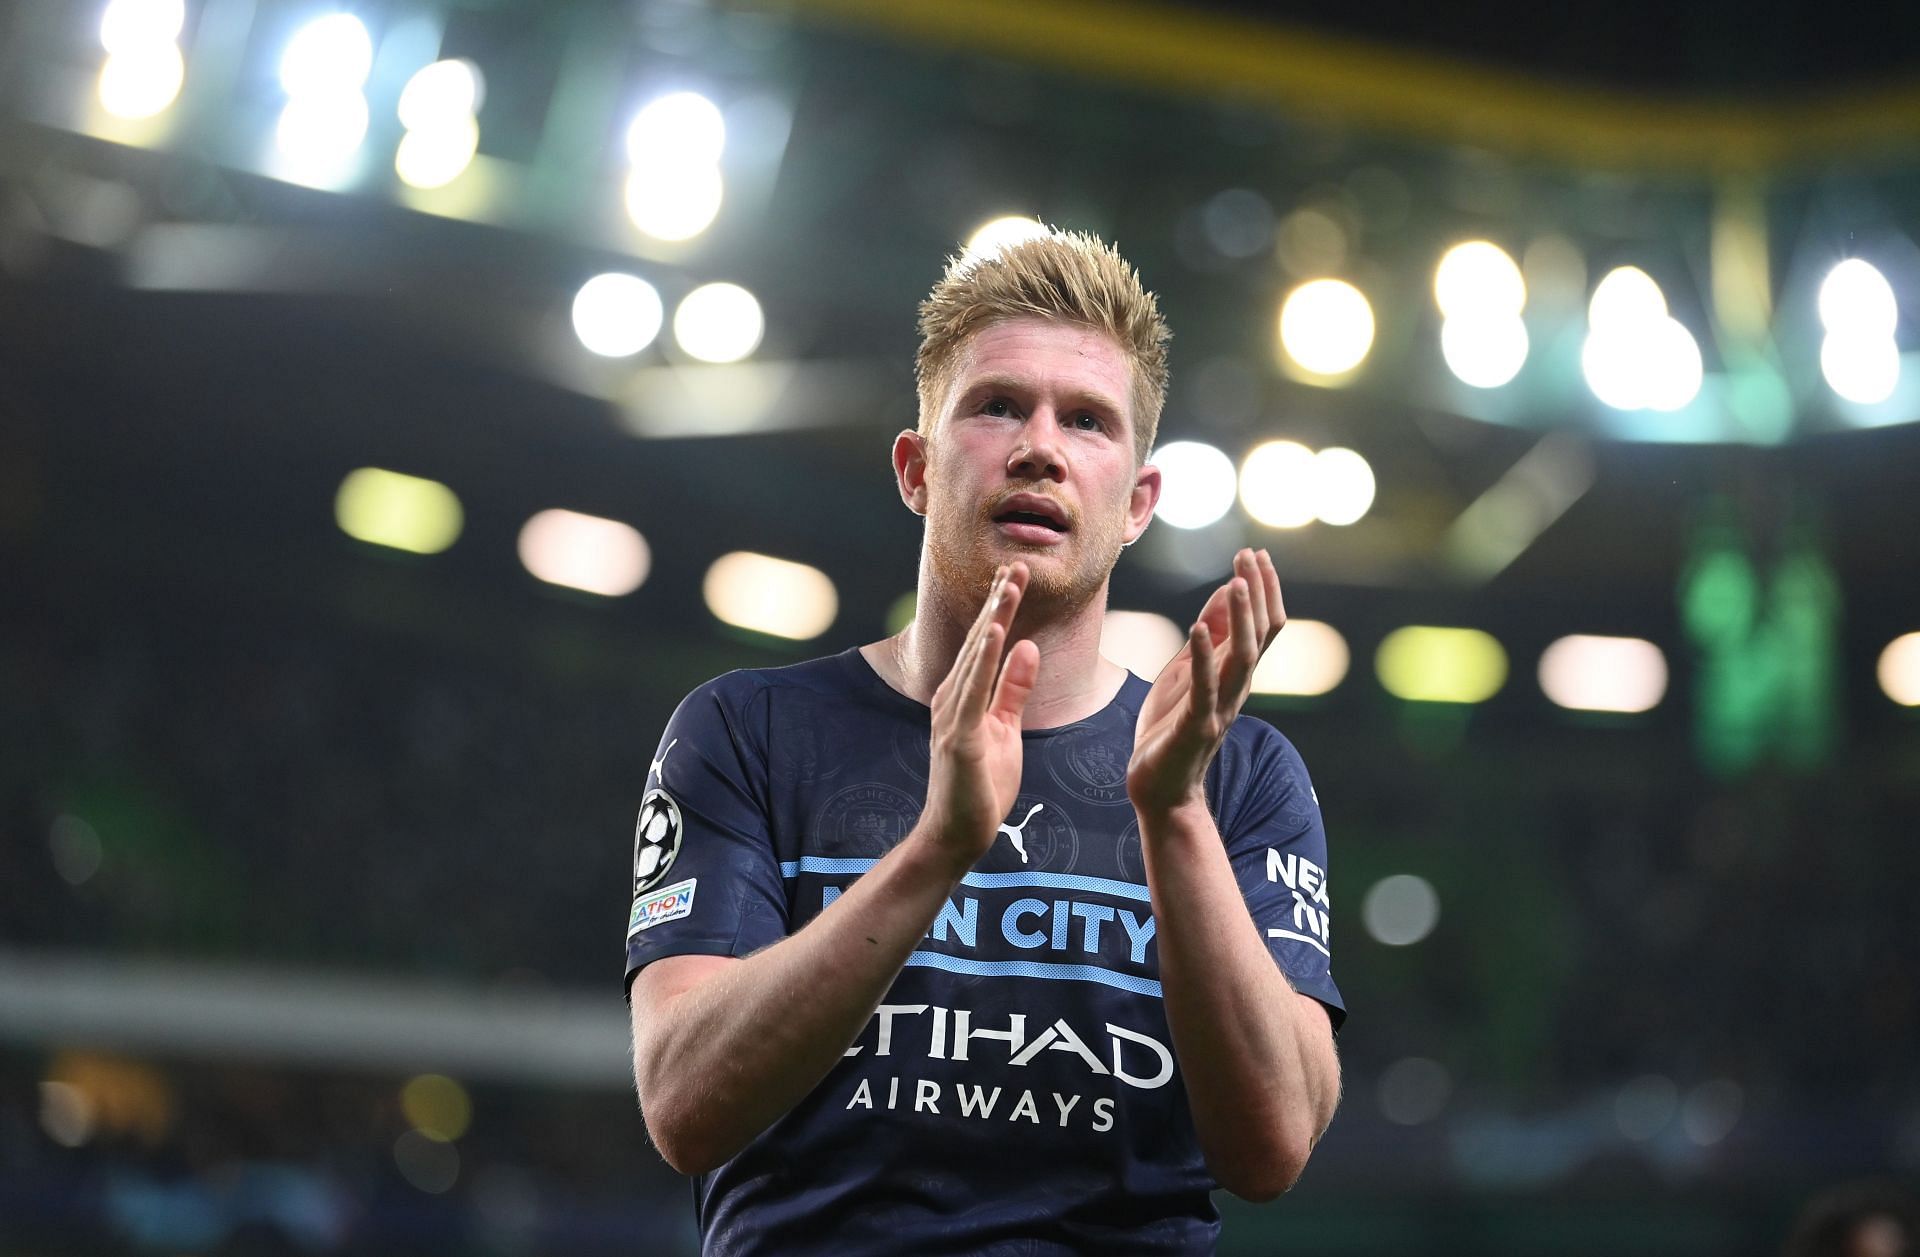  Manchester City midfielder Kevin de Bruyne put in an industrious performance against Sporting Lisbon